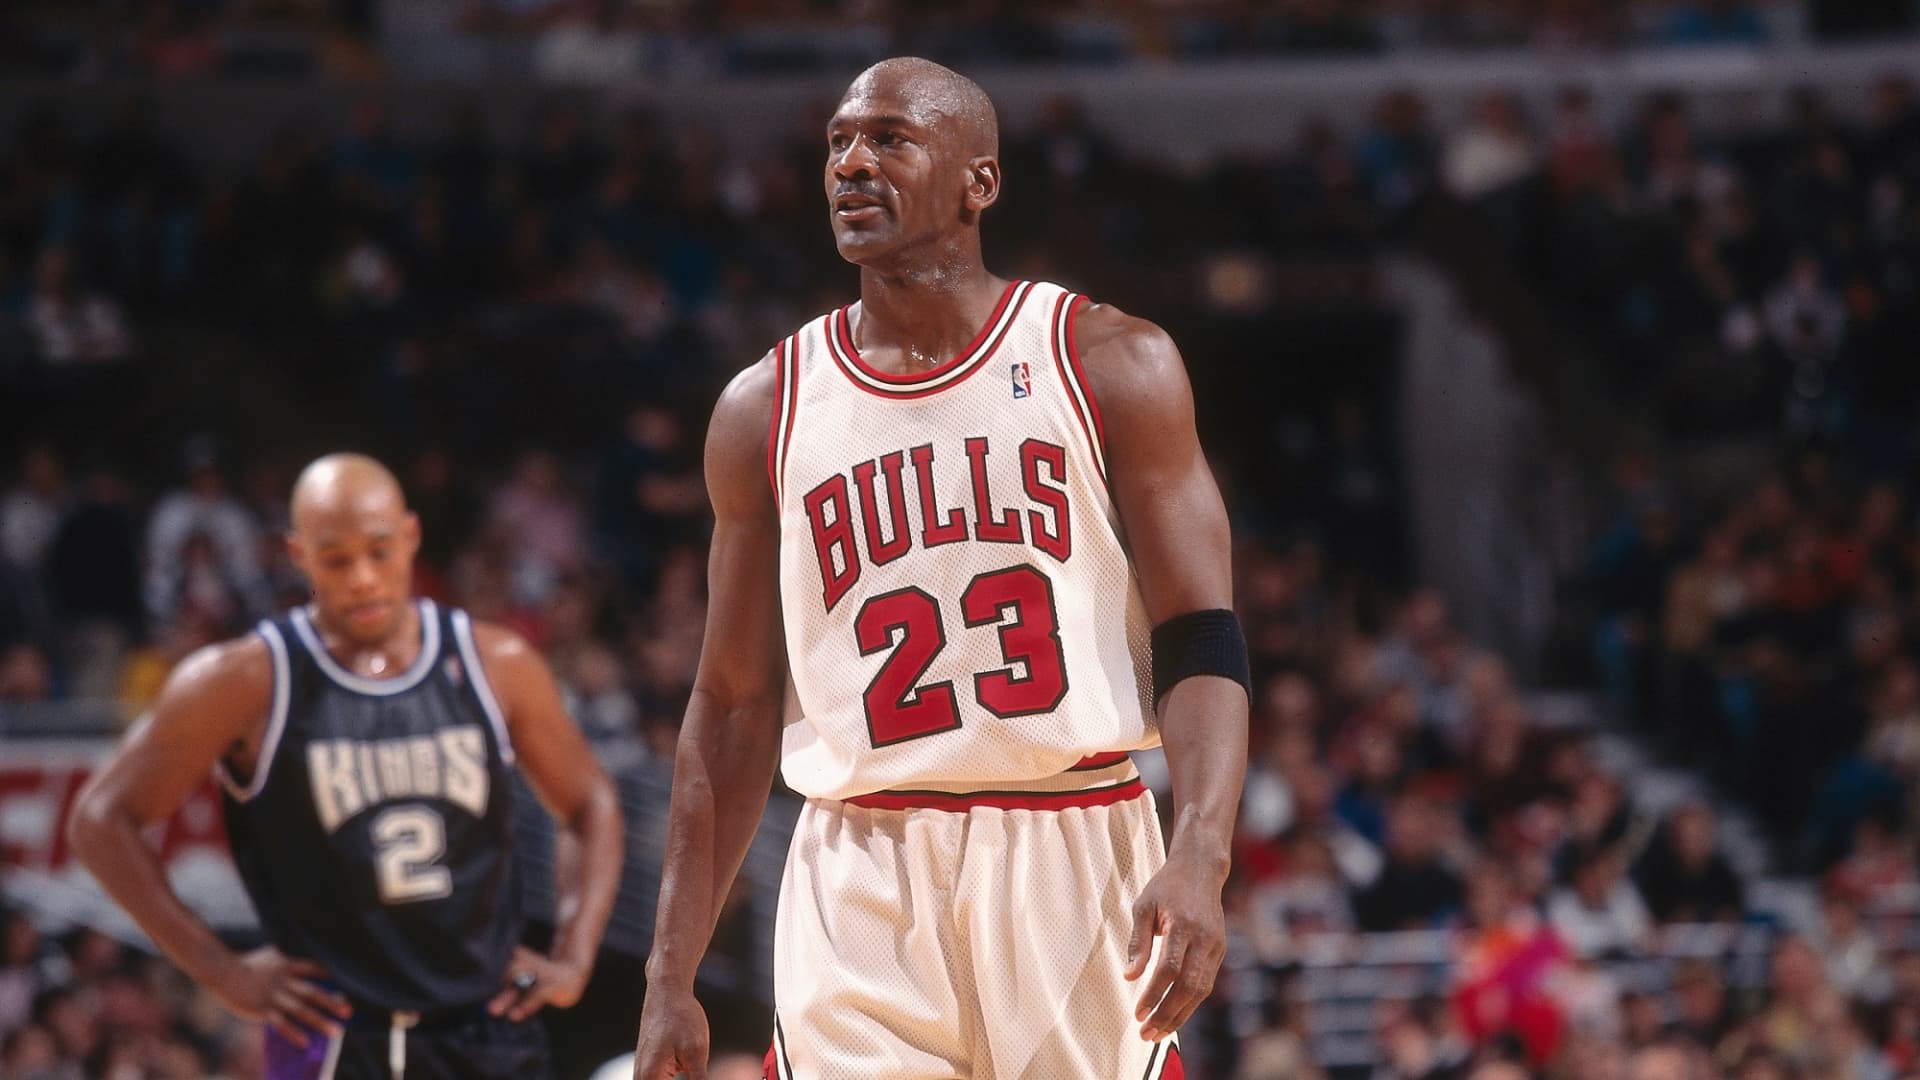 What is the name of Michael Jordan's famous shoe line?